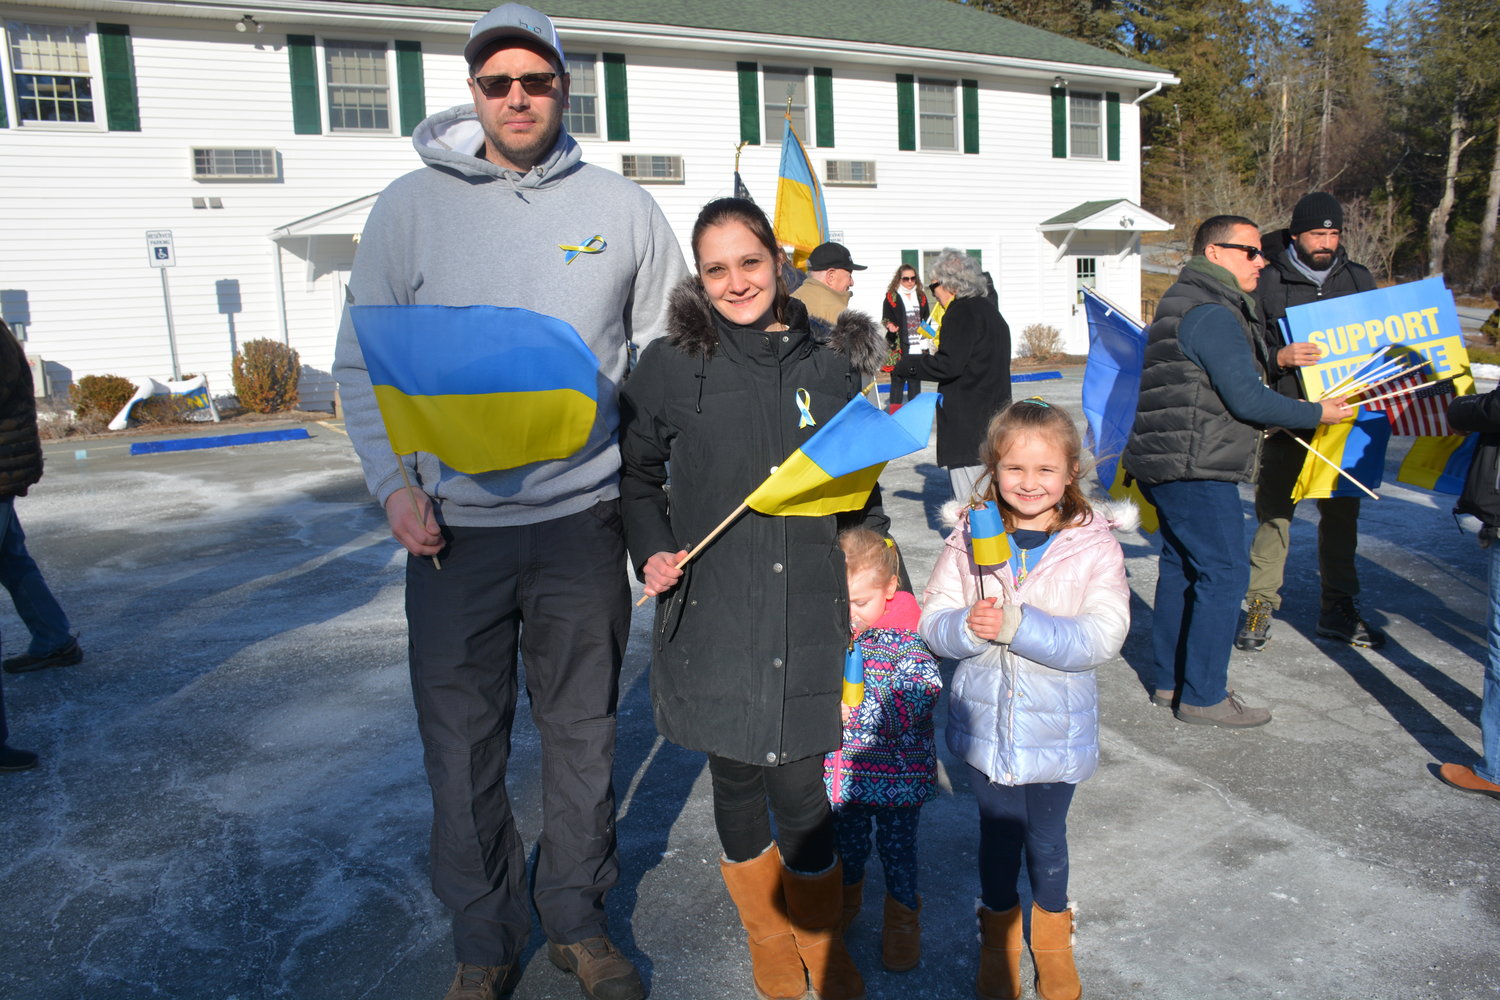 James and Natalie Steimle with daughters Julia (at right) and Michaela (hiding behind mom), proudly wave Ukrainian flags. Behind them to the right, handing out signs and flags, is rally organizer Frank Guzman and his husband Alexander Brito.